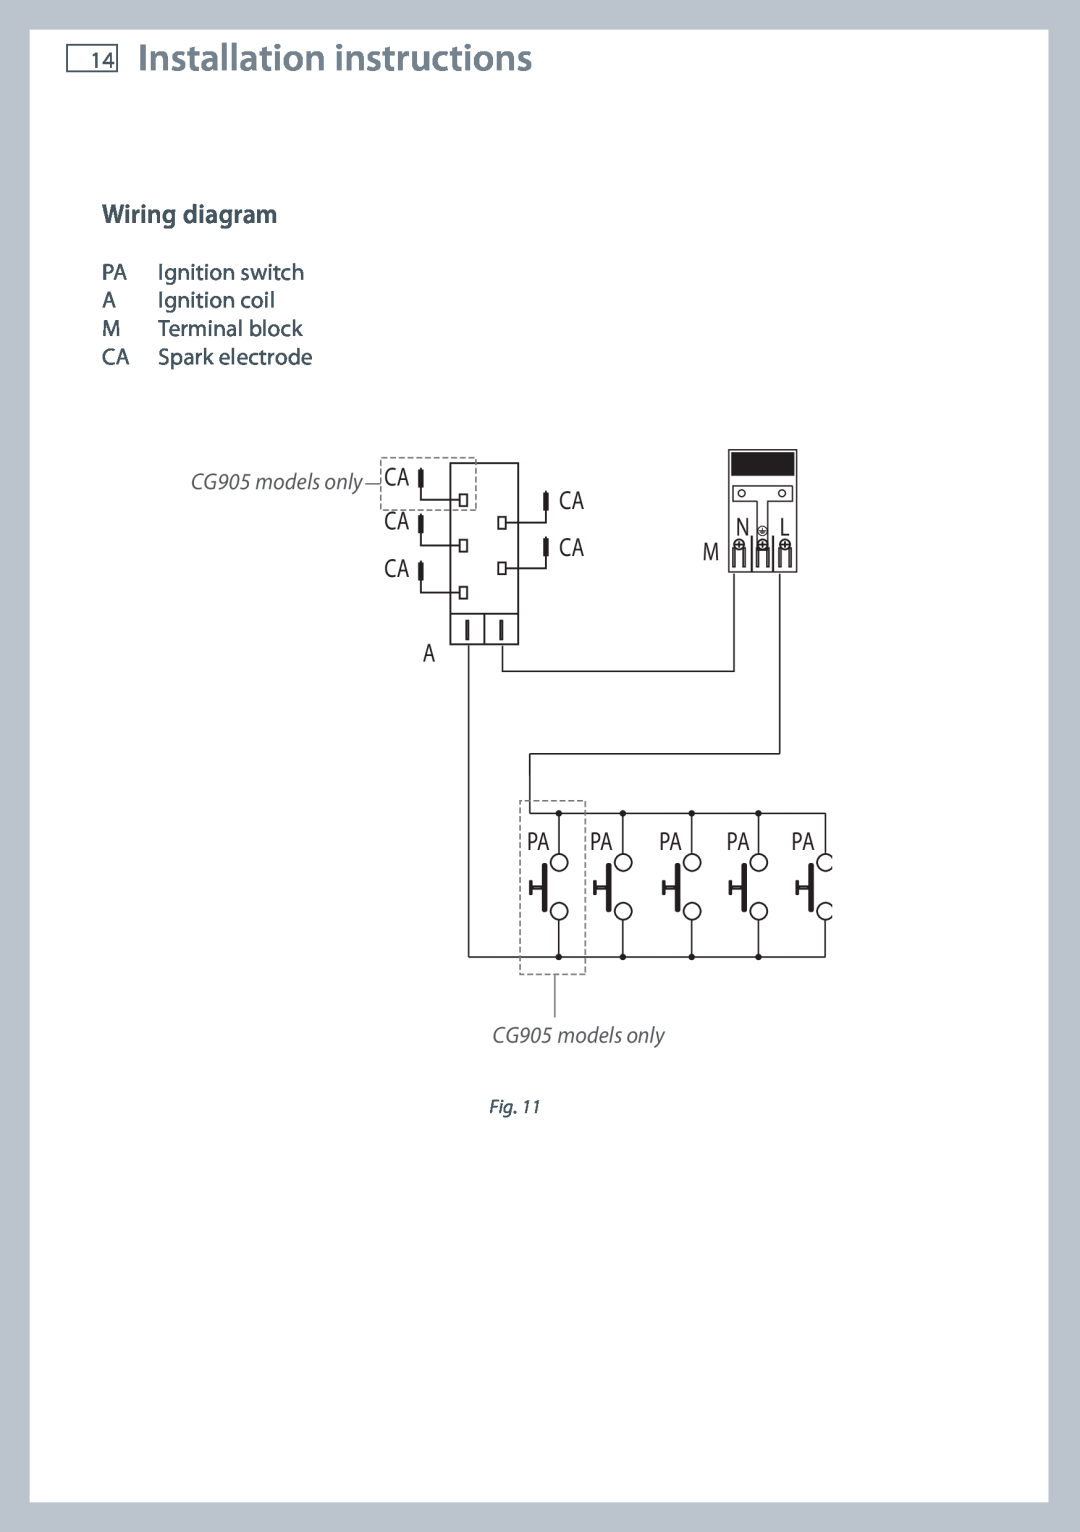 Fisher & Paykel Wiring diagram, Installation instructions, Ca Ca A, Ca Ca M, N L, Pa Pa, CG905 models only CA 